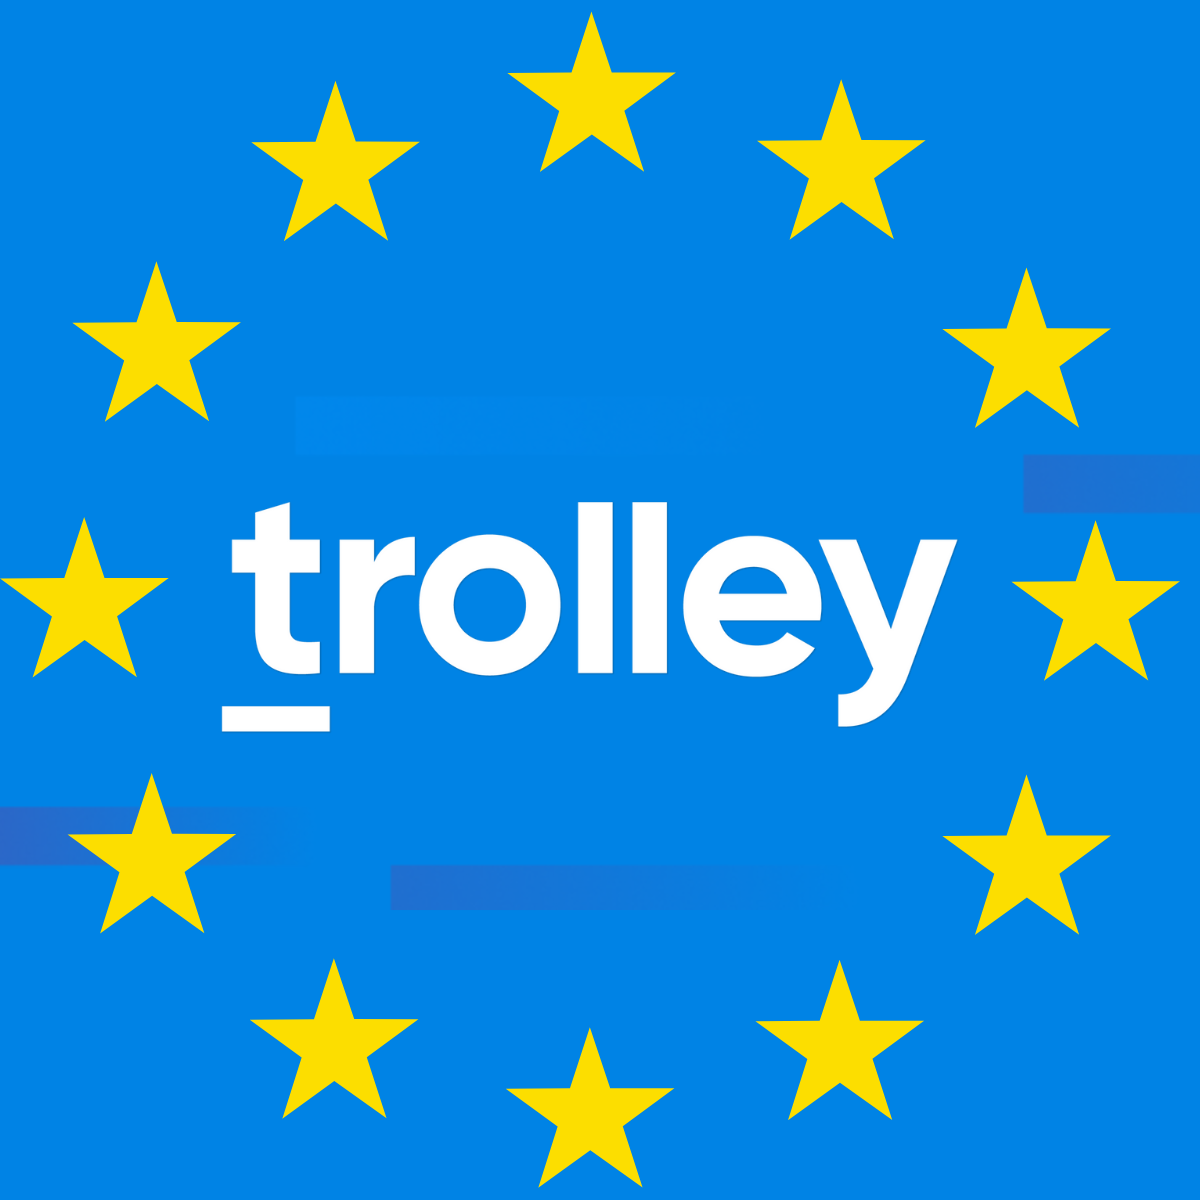 [Press Release] Trolley Announces All New DAC7 Compliance Product